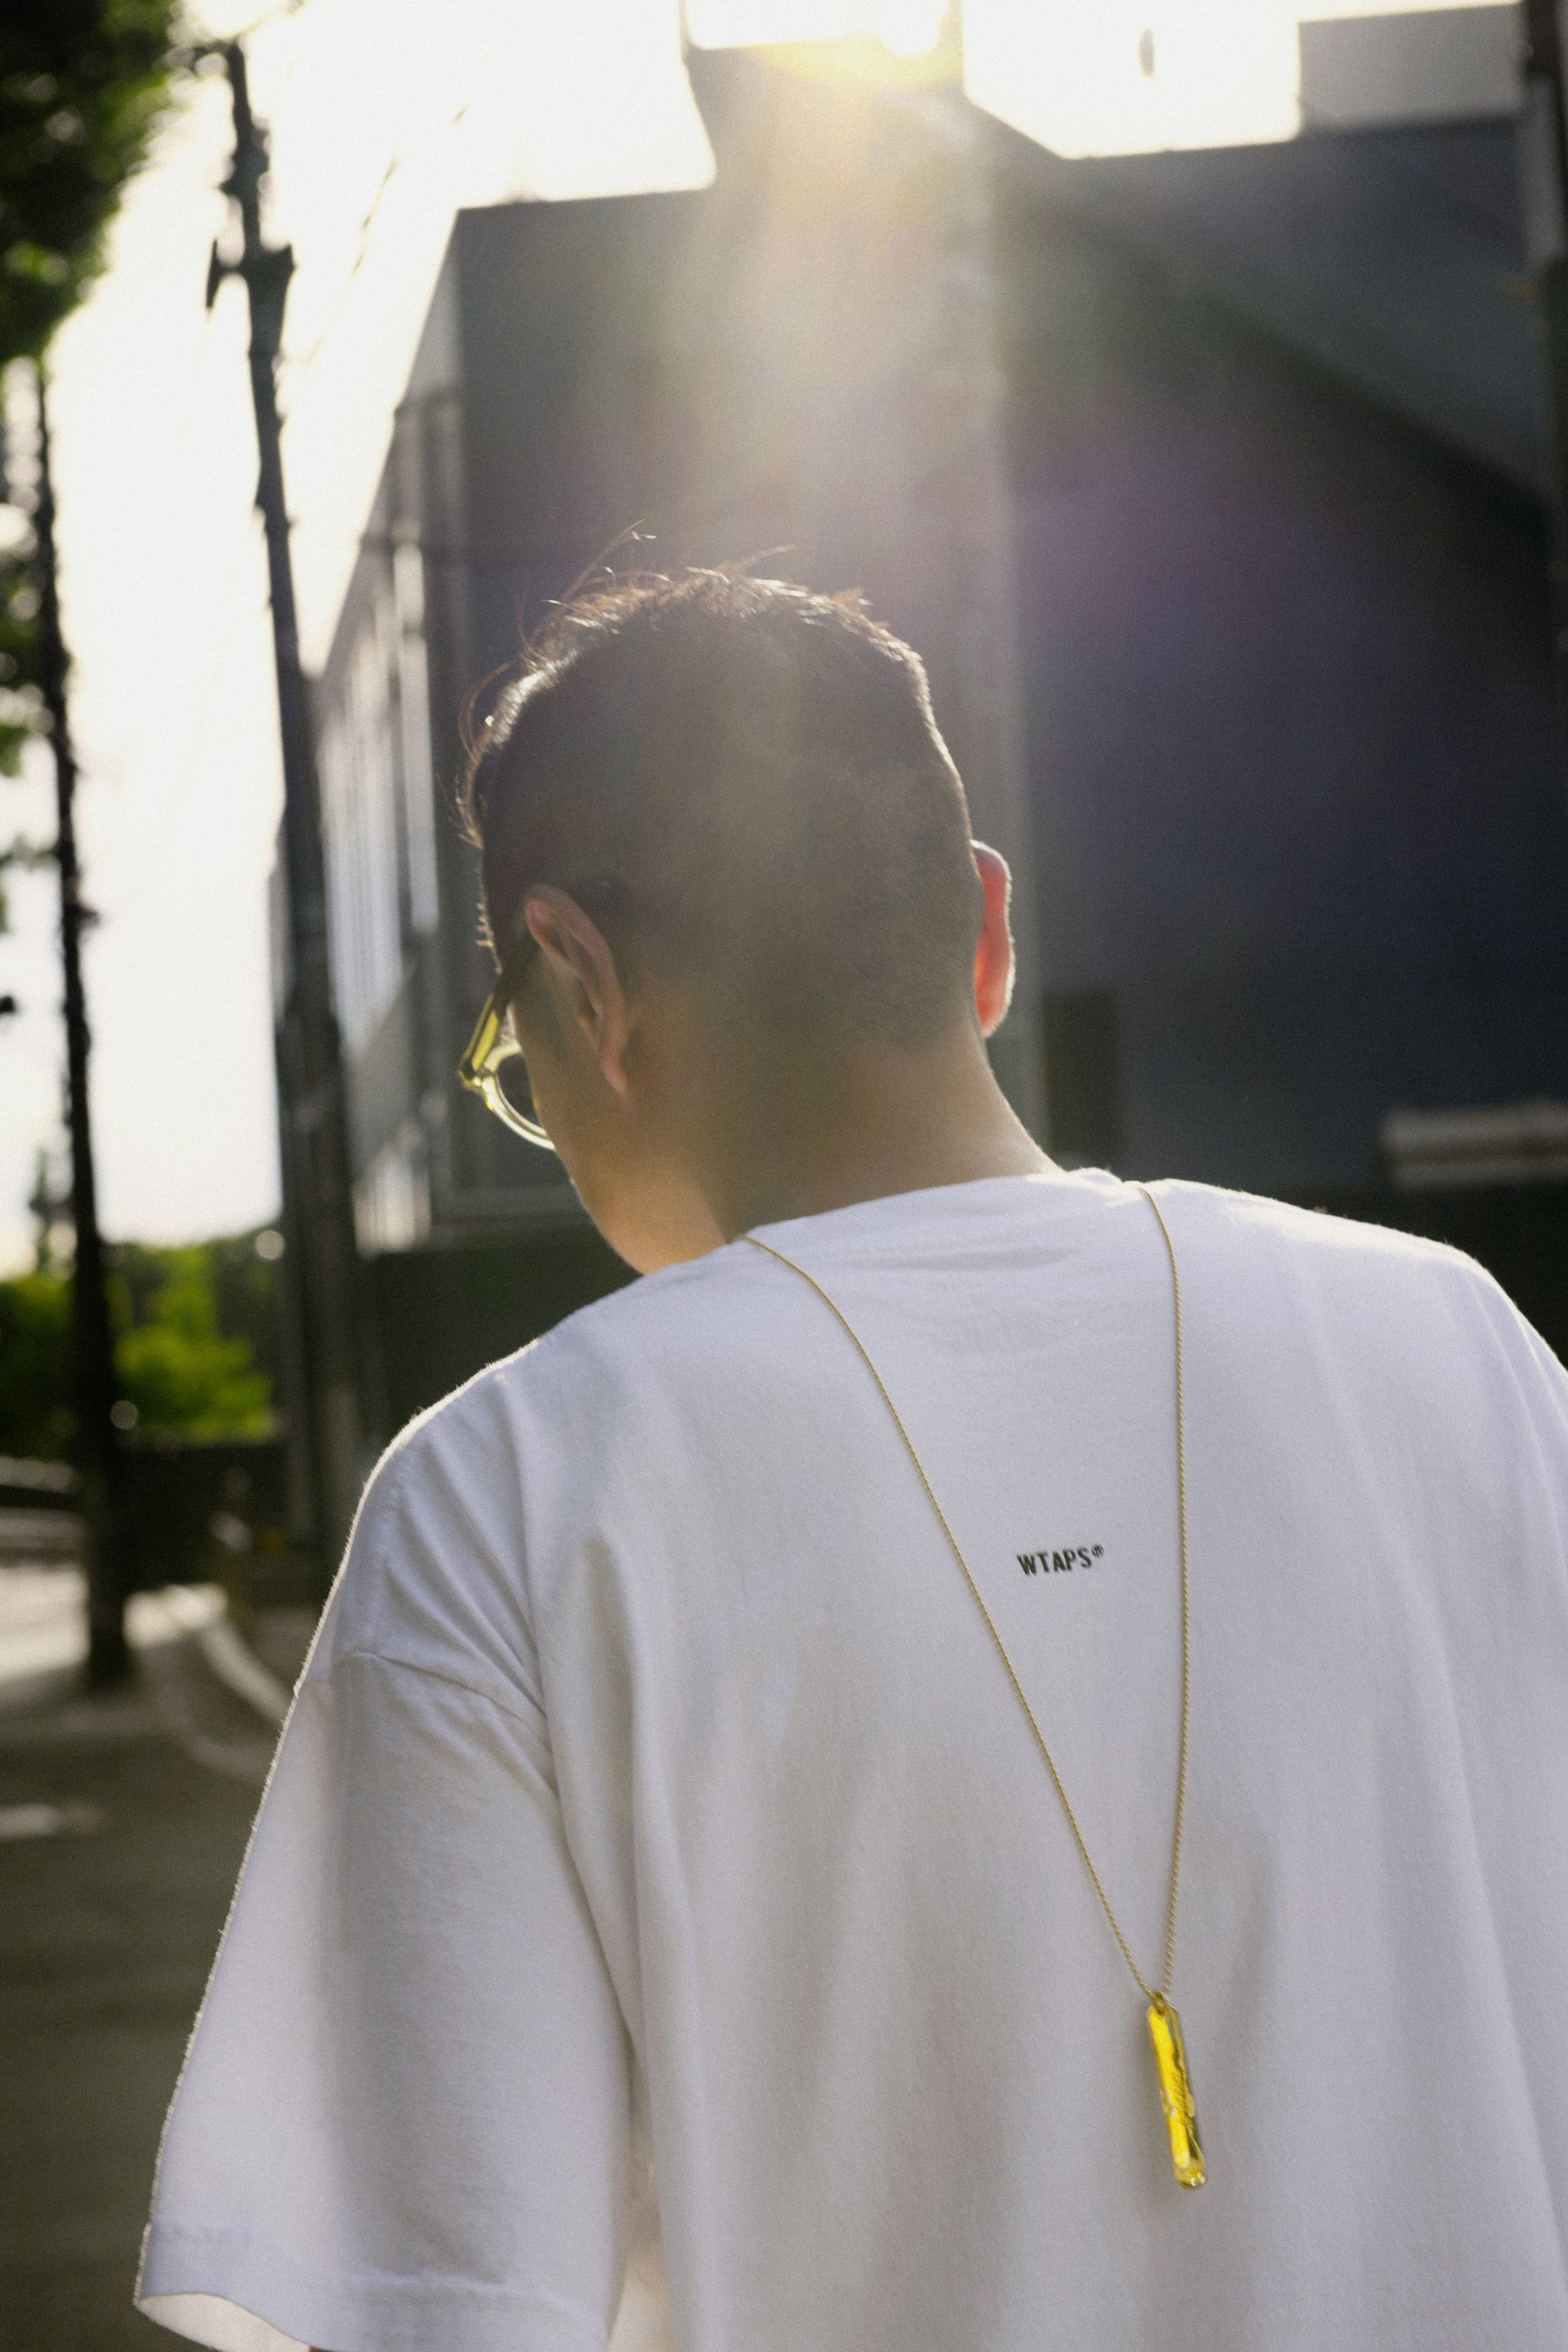 WTAPS Readies Limited-Edition 18K Gold Necklace hong kong store 1st anniversary Tetsu Nishiyama jewelry accessories 29,000 hkd 3,700 usd Tokyo japan haven